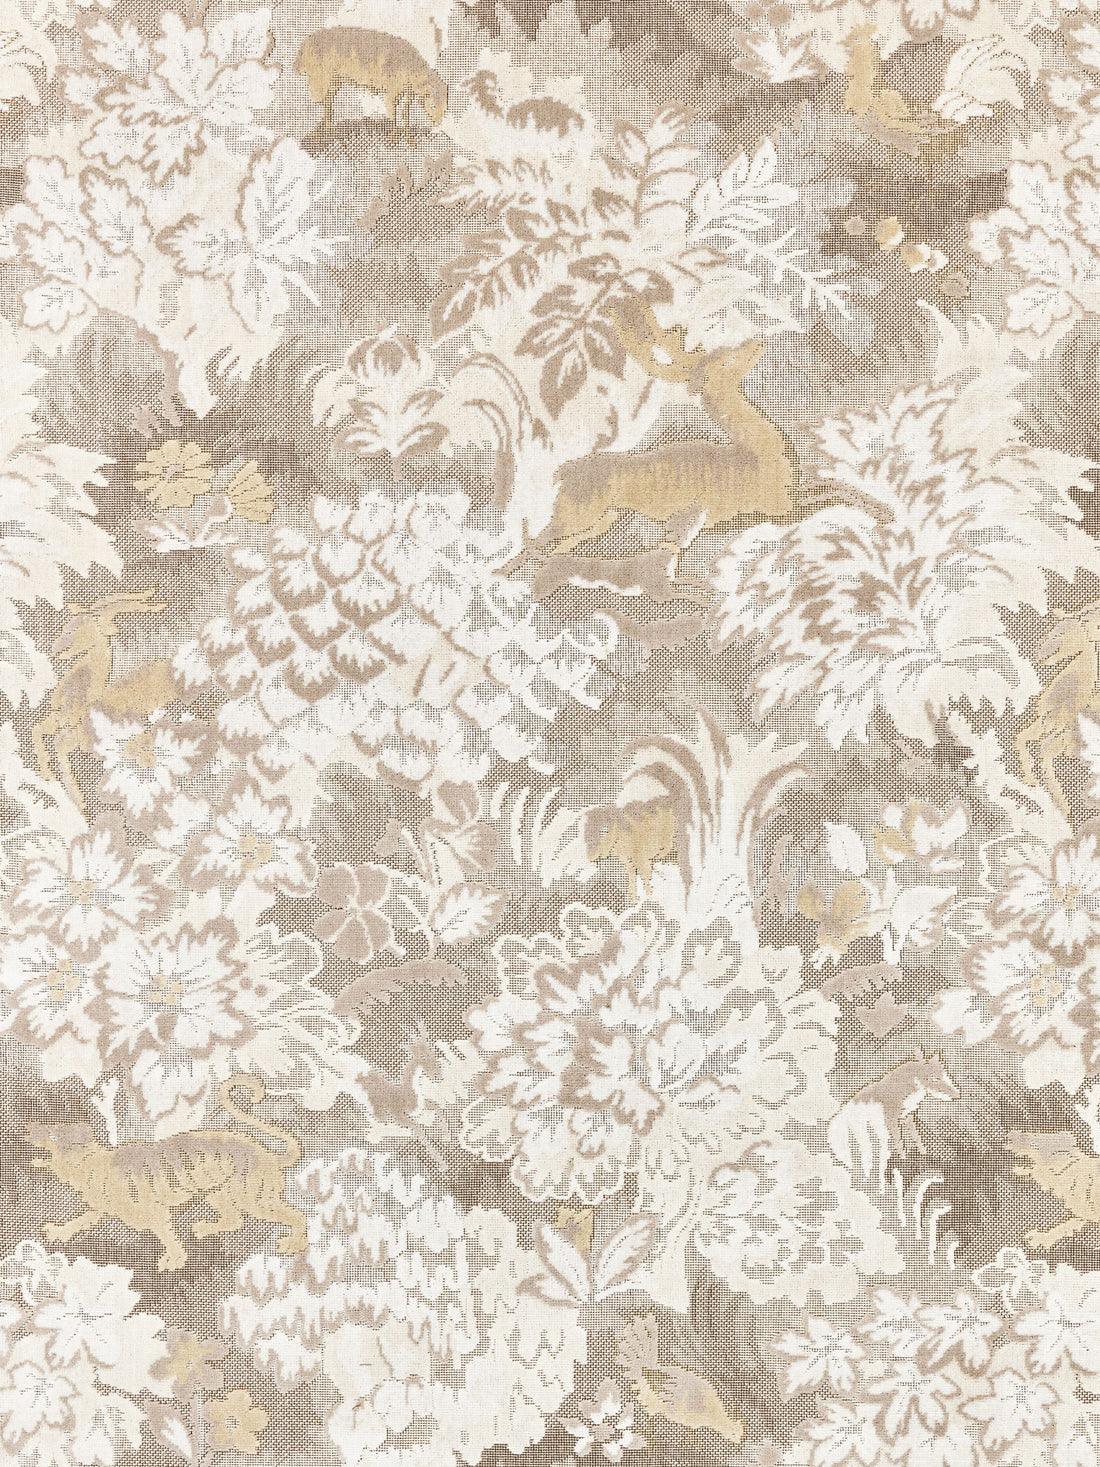 Tails Tale fabric in travertine color - pattern number M1 00030264 - by Scalamandre in the Old World Weavers collection